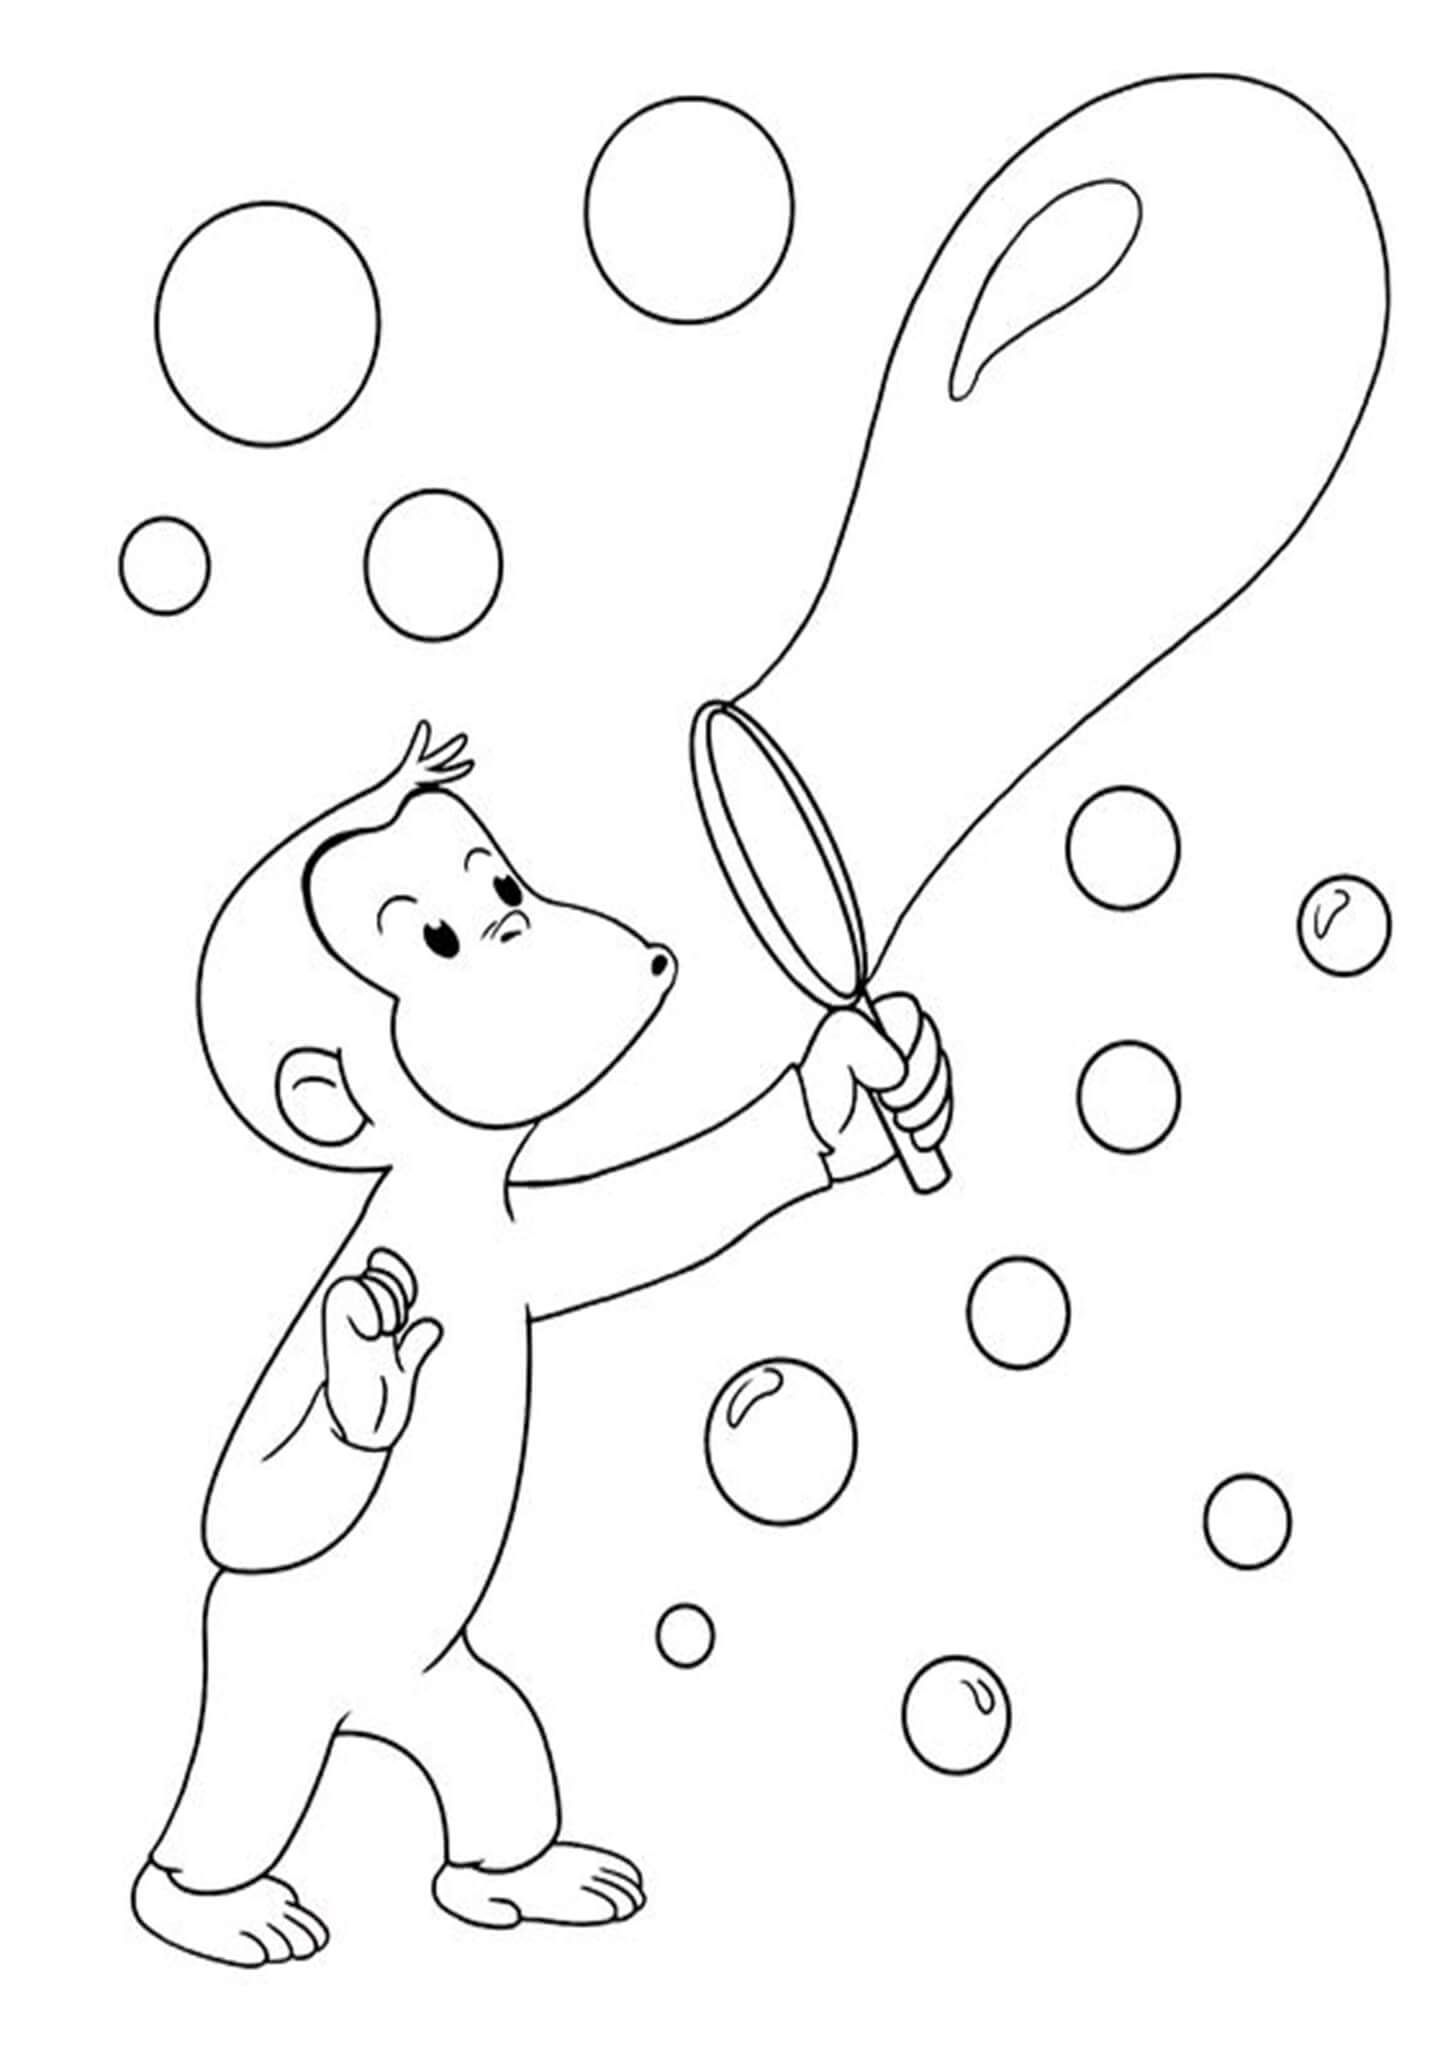 Free & Easy To Print Curious George Coloring Pages | Curious george  coloring pages, Birthday coloring pages, Coloring pages for kids